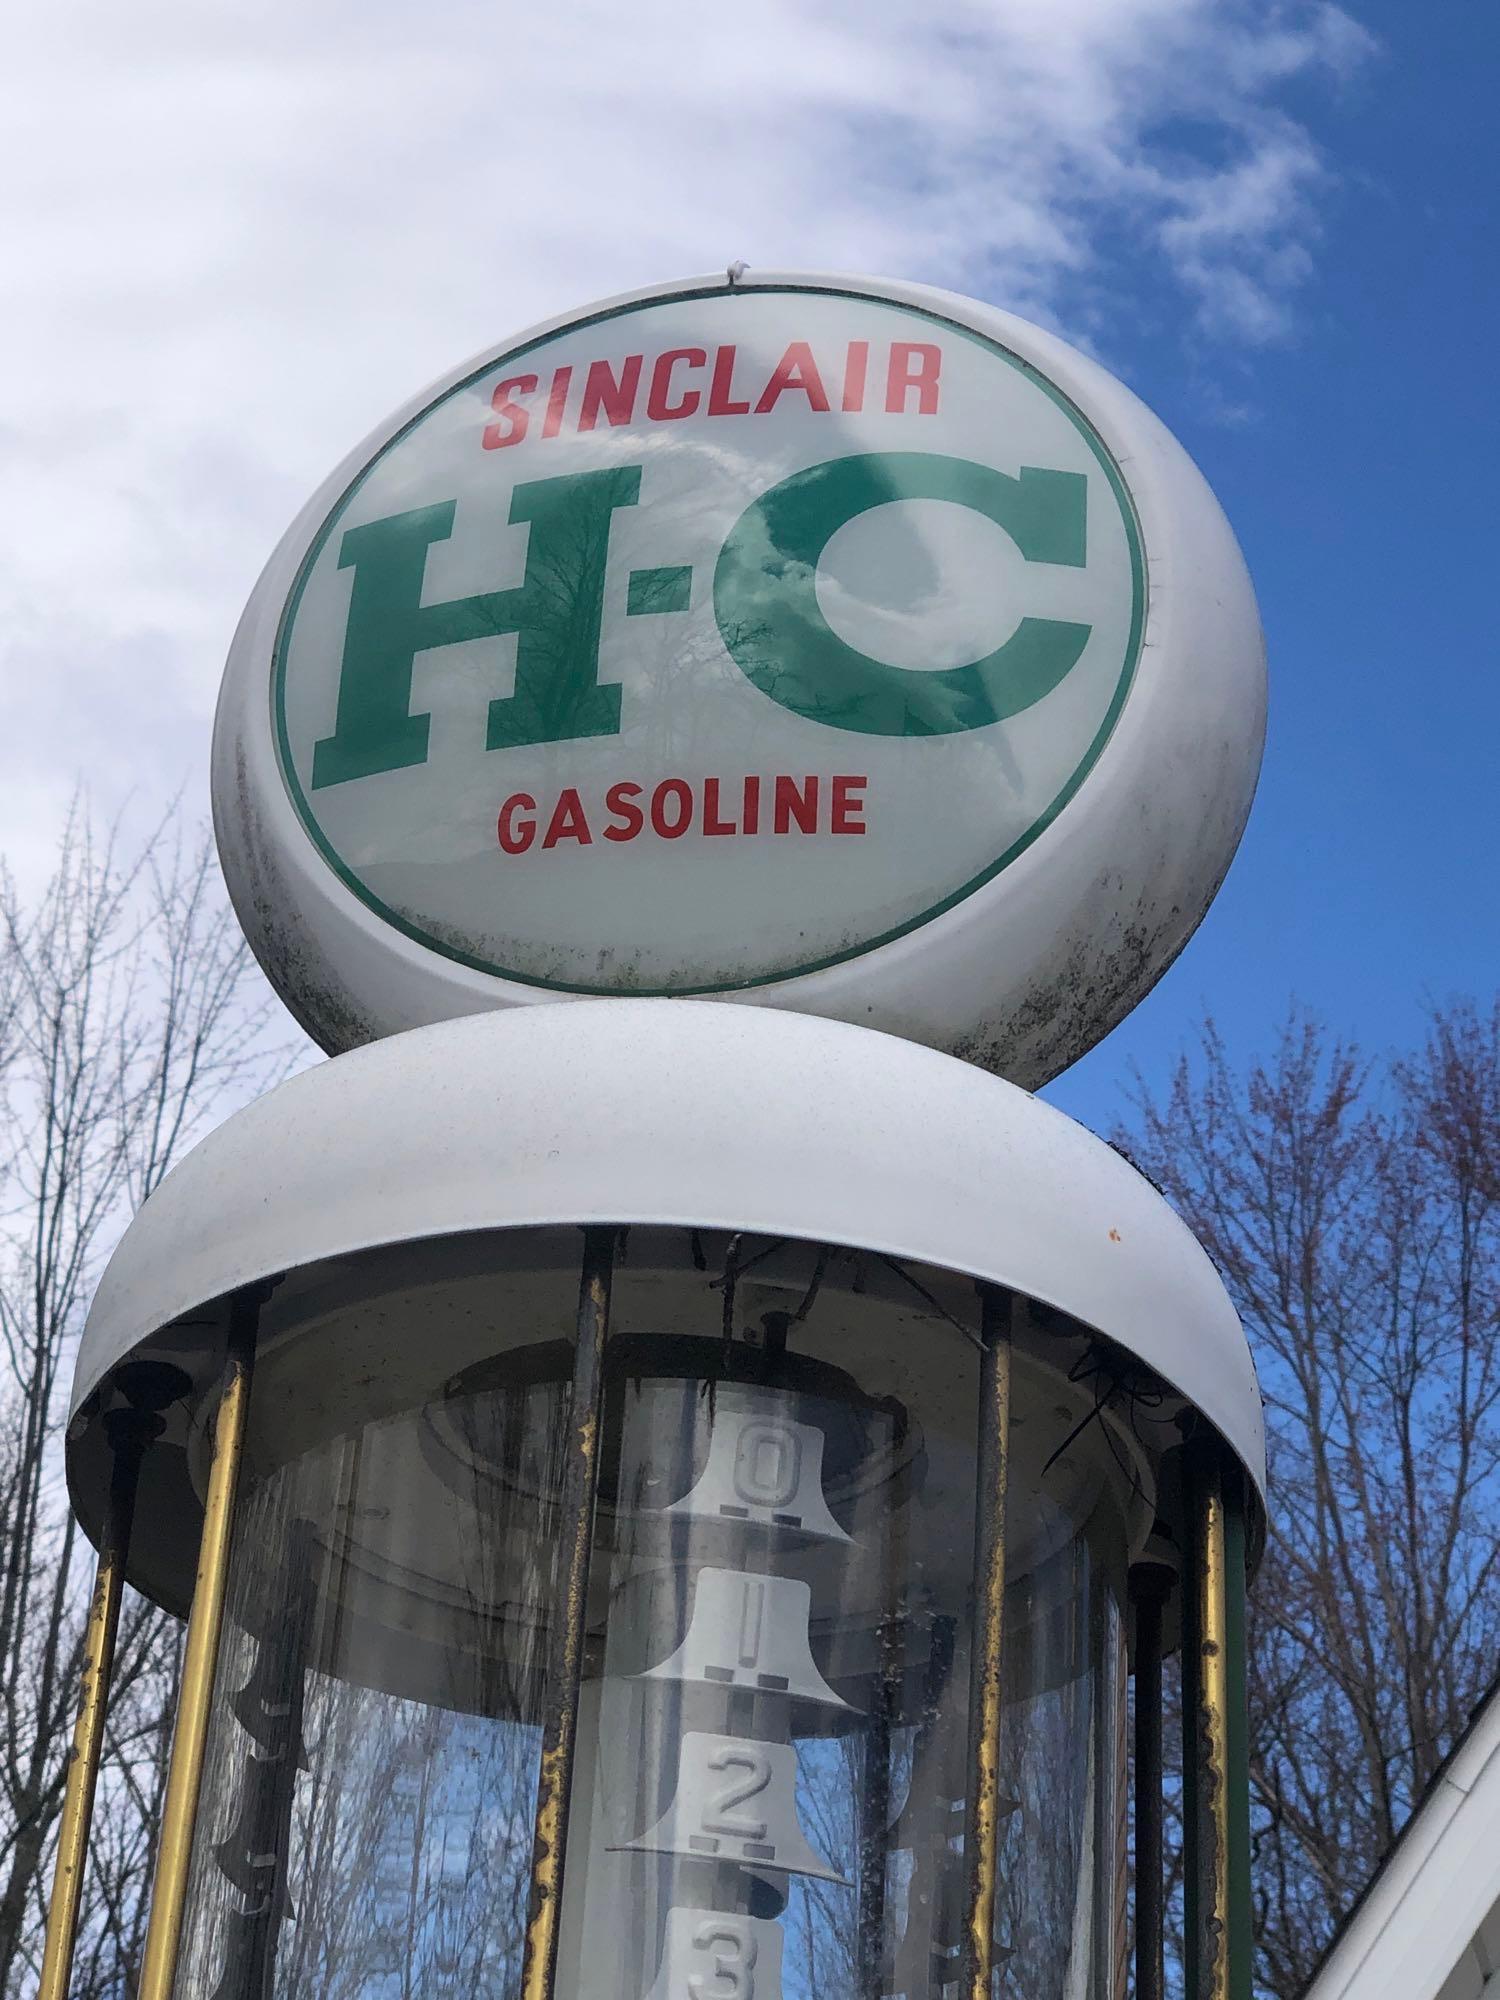 Green visible gas pump with Sinclair advertising